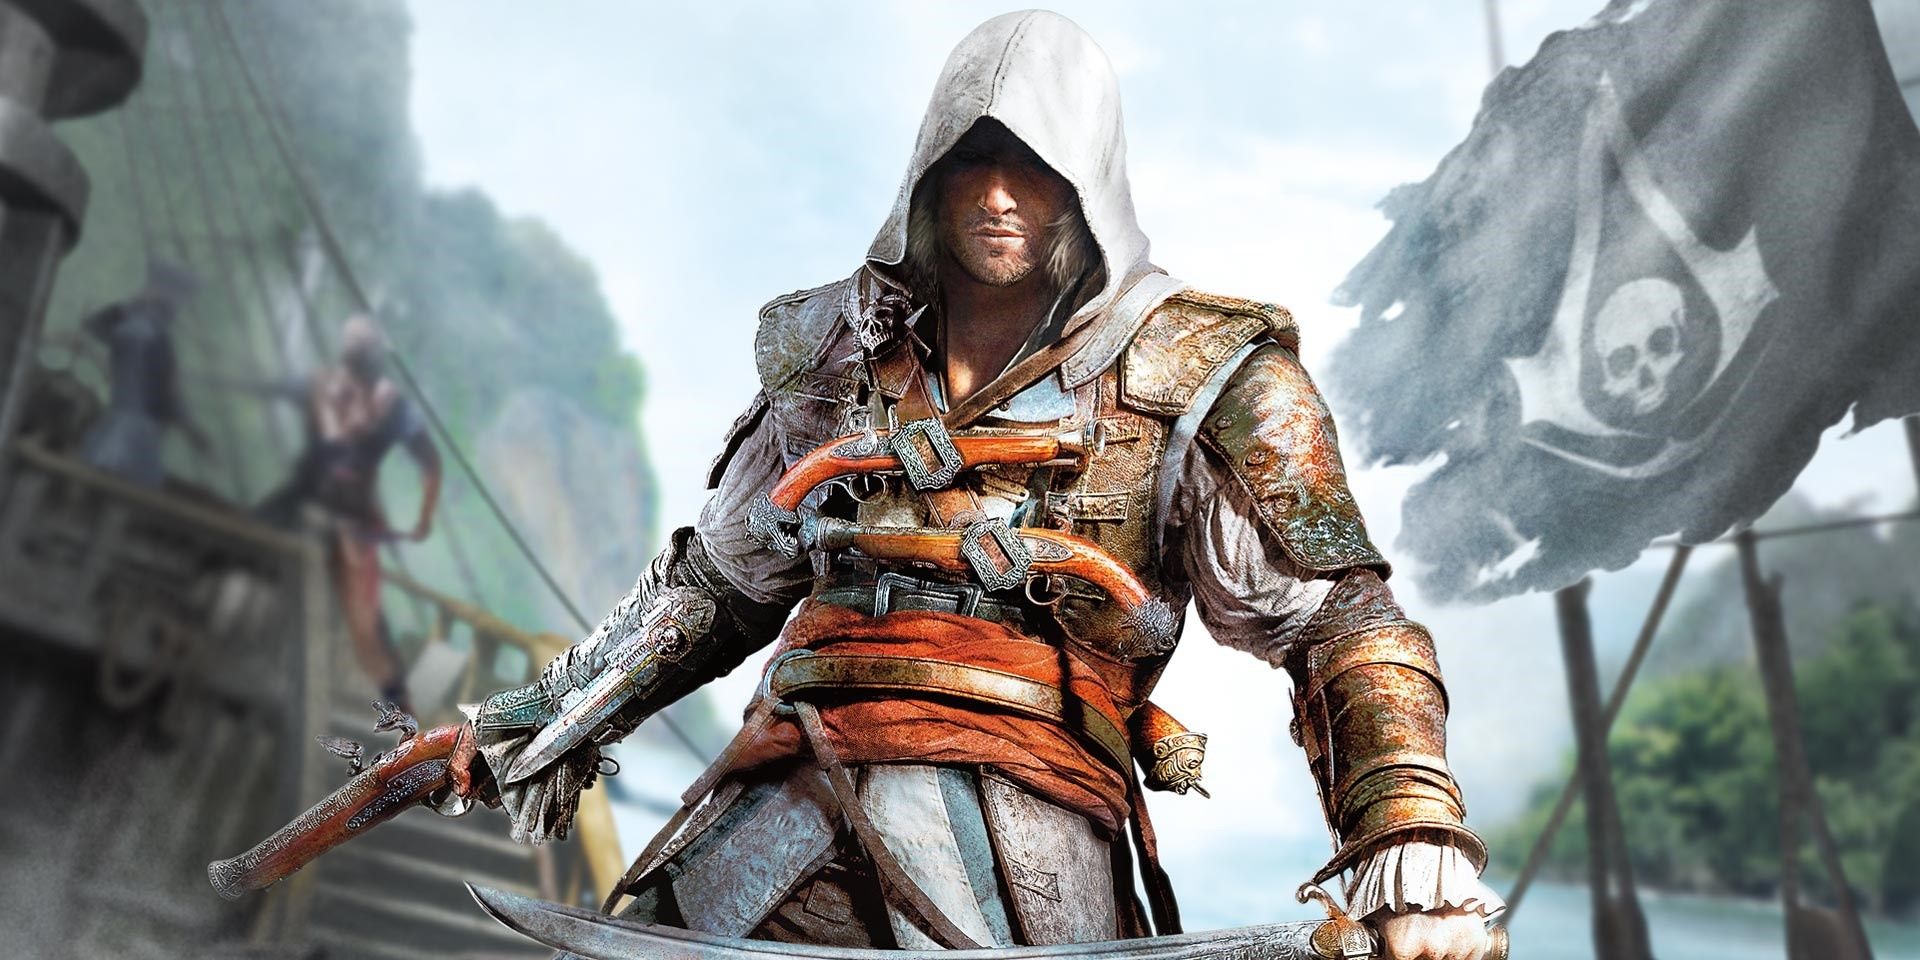 Assassins Creed 5 Games That Could Be Turned Into Films (And 5 That Shouldnt)